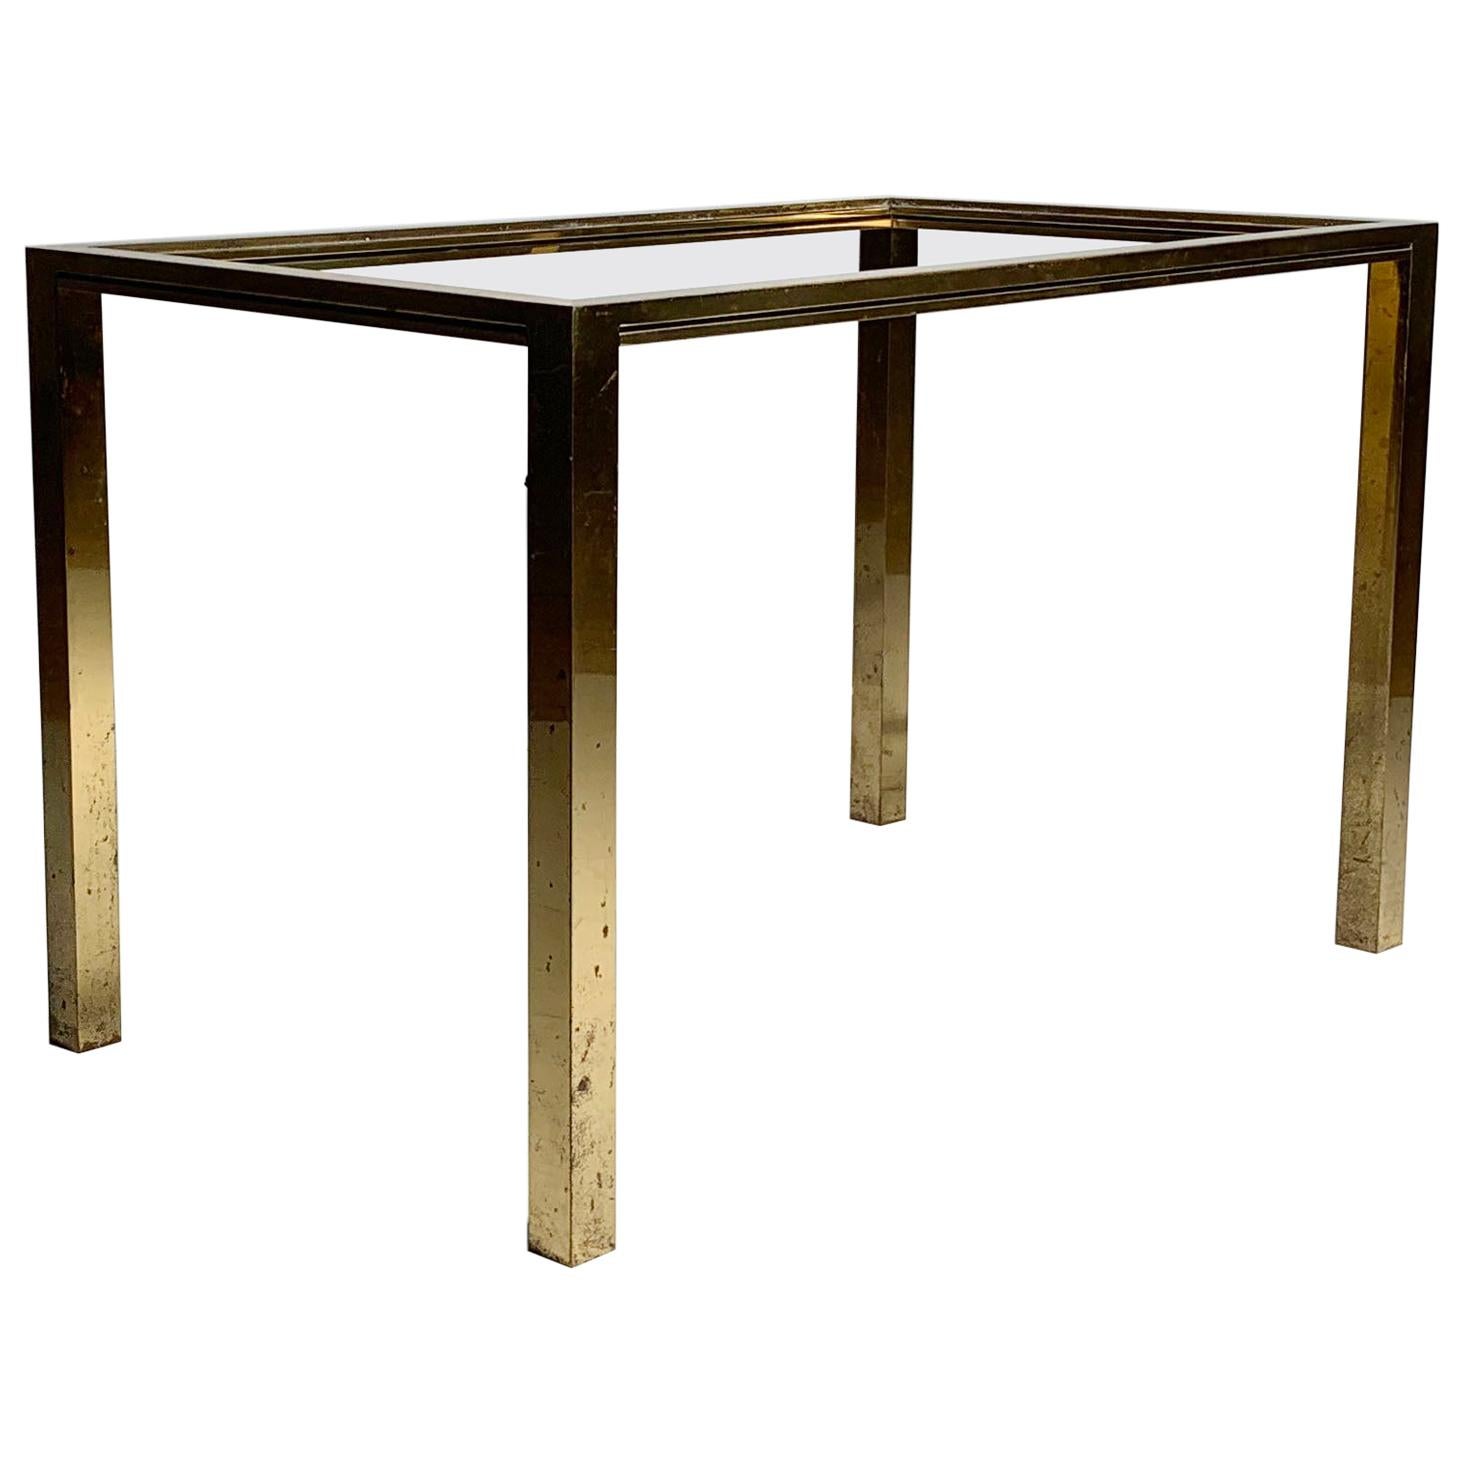 High Quality Vintage Petite Brass Coffee Table Attributed to Jansen